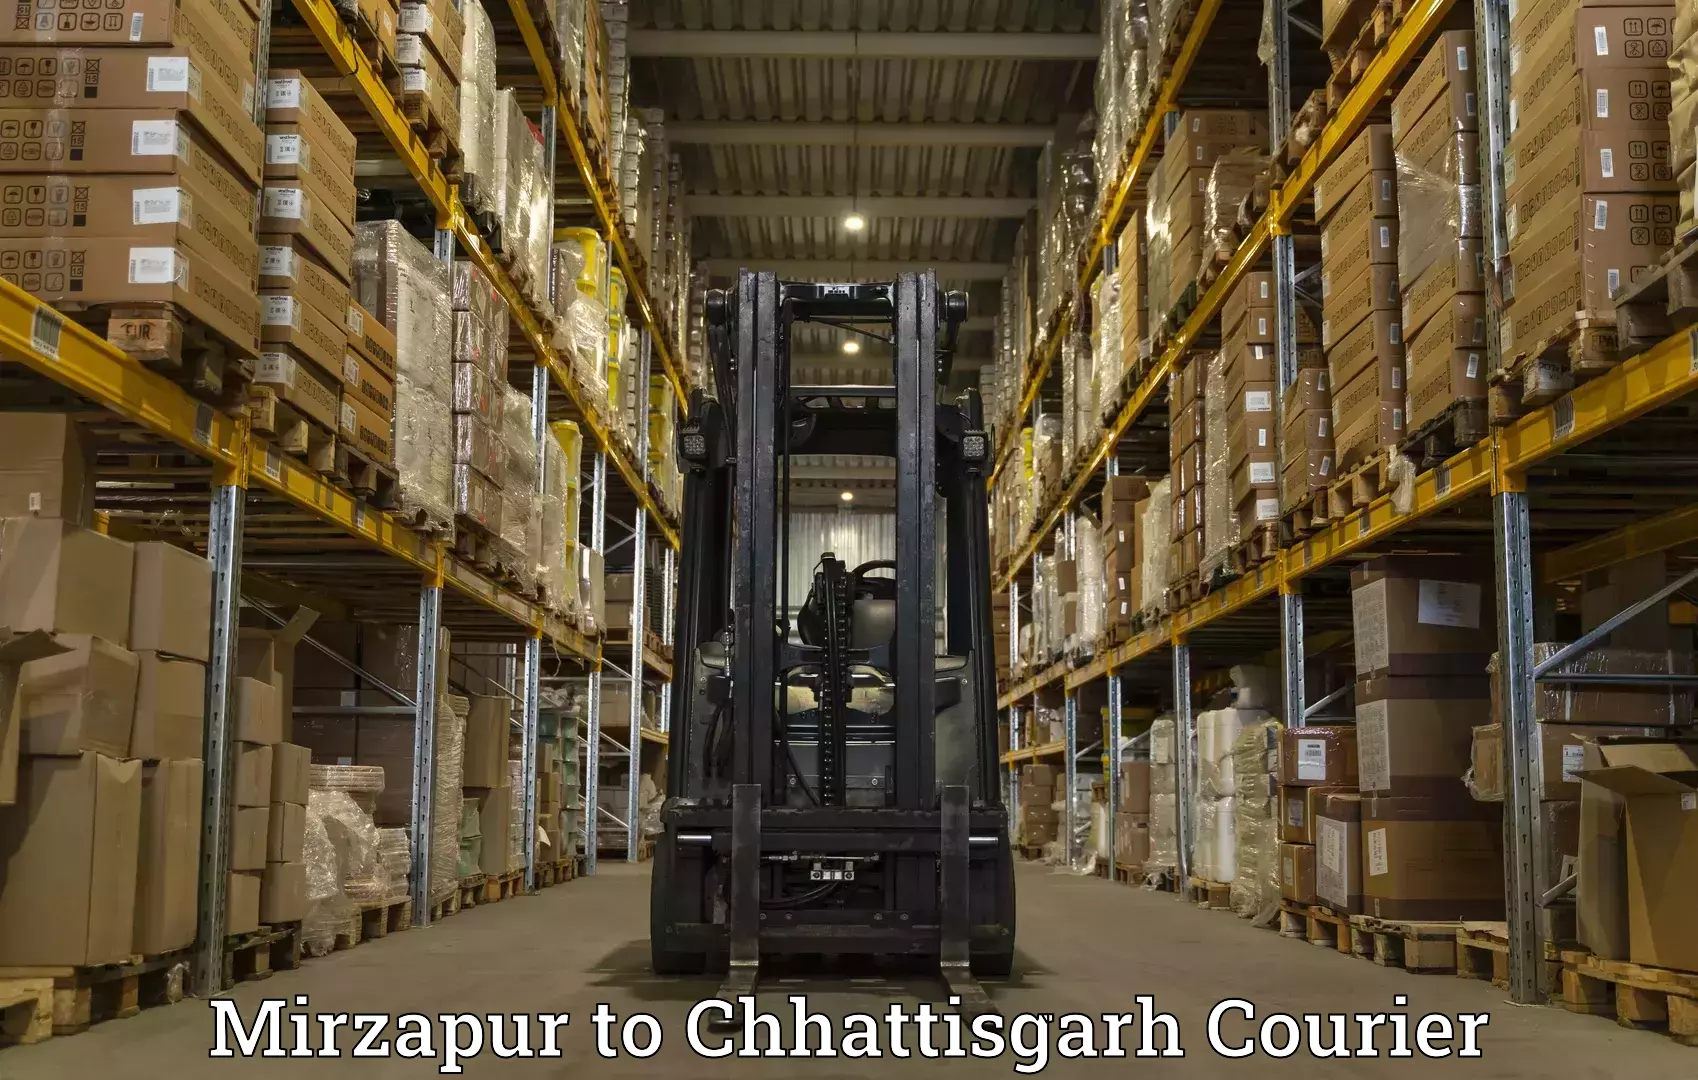 Global delivery options Mirzapur to Patna Chhattisgarh